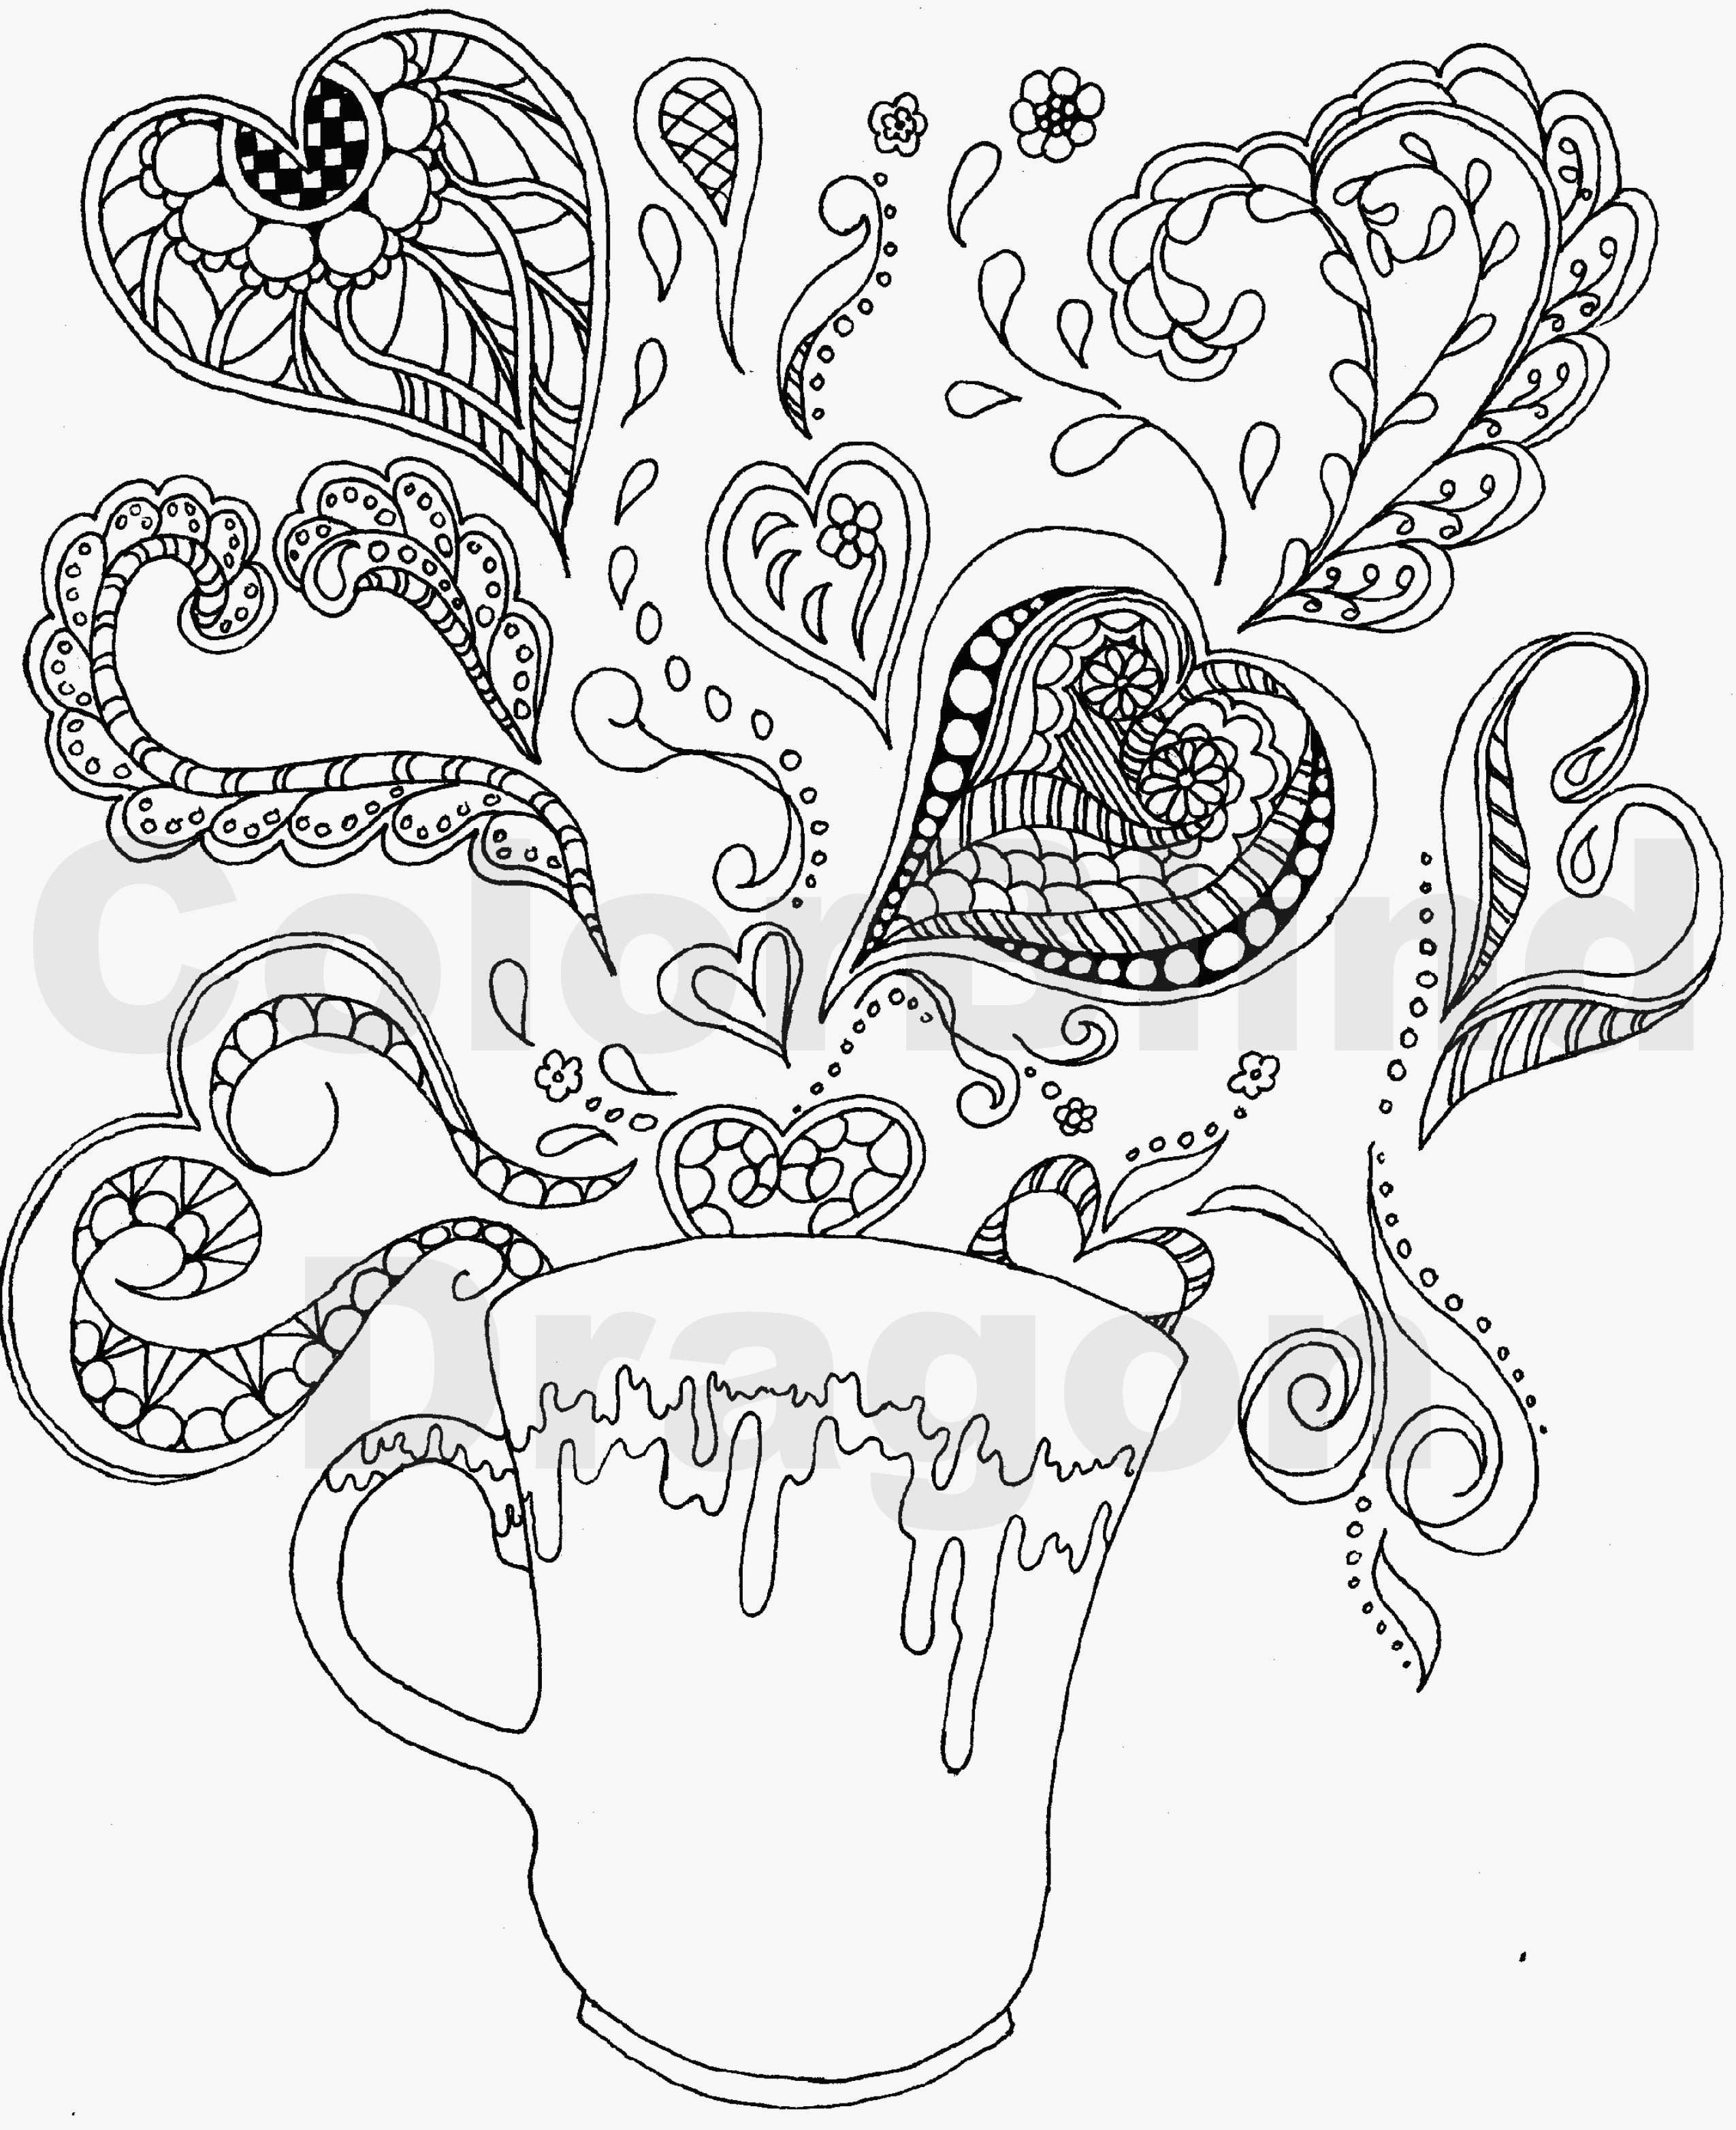 download 42 elegant drawing coloring pages with original resolution click here